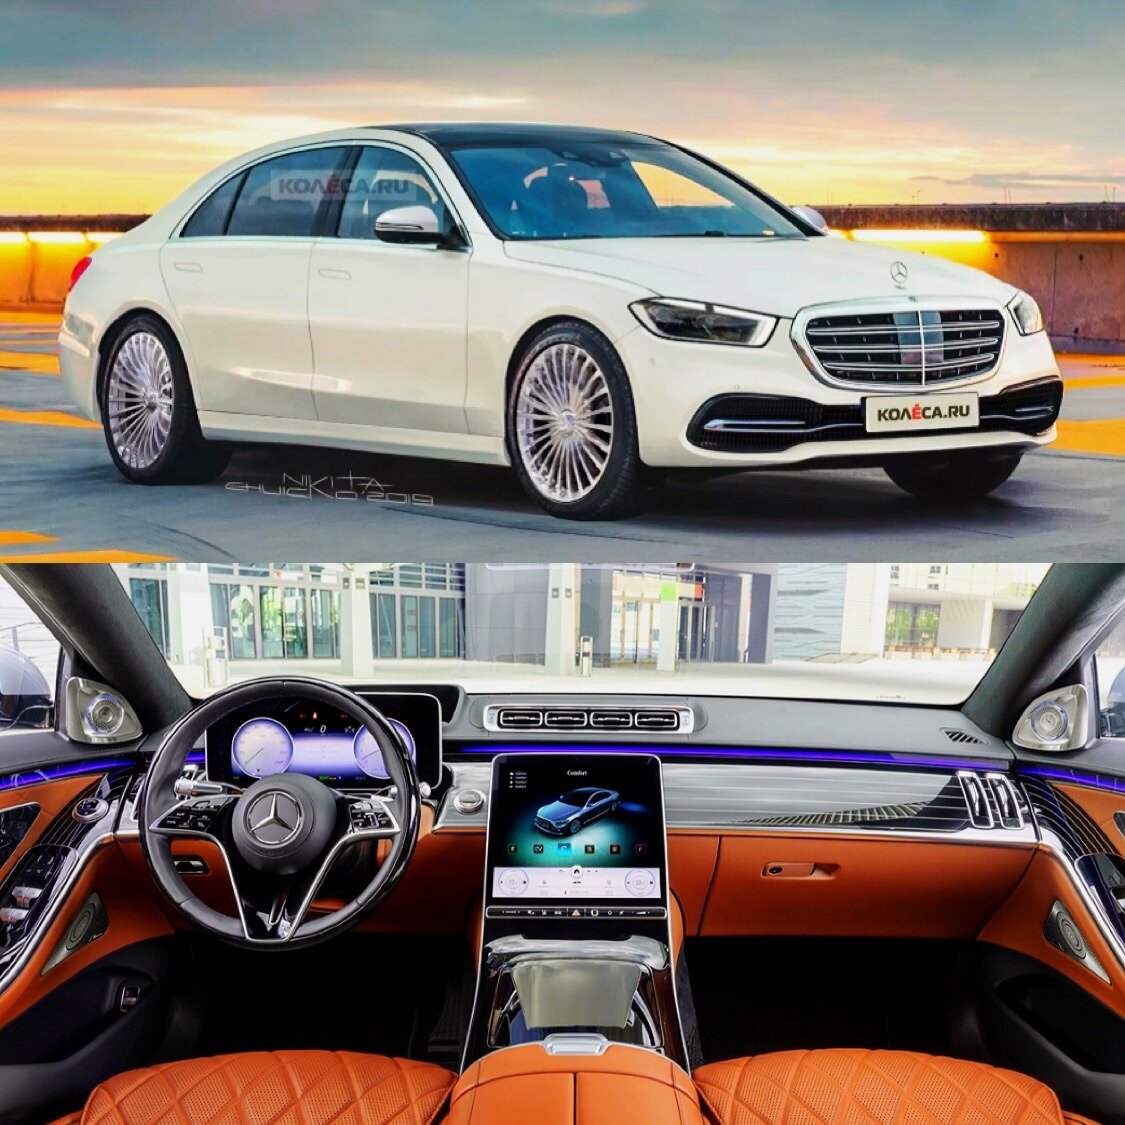 Mercedes benz class 2020. Мерседес s600 w223. Мерседес s500 w223. Мерседес s600 новый. Мерседес s500 2021.